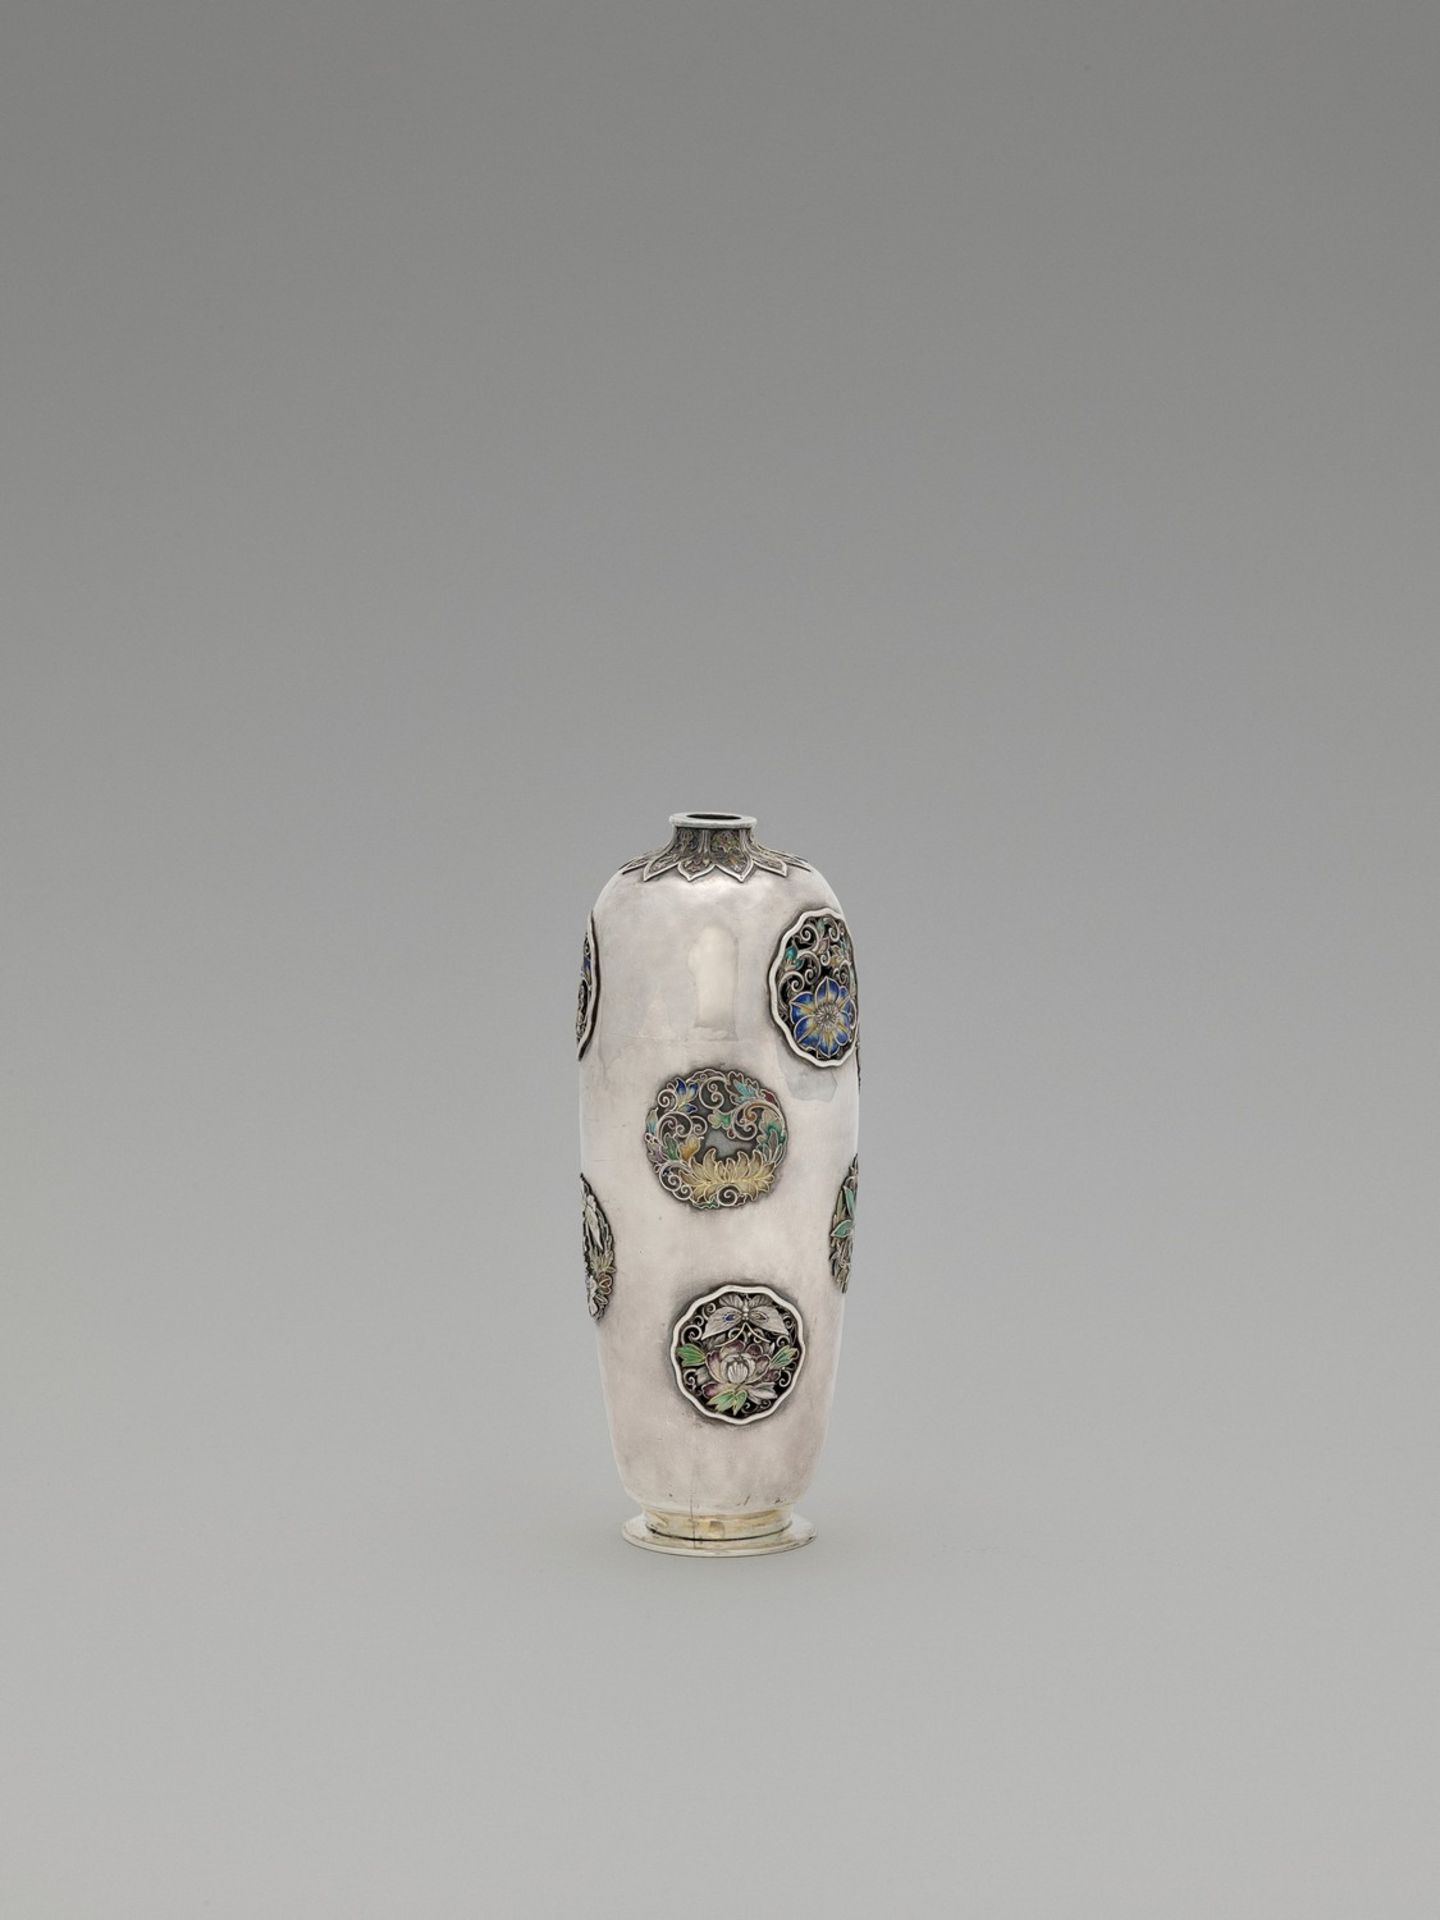 A RARE AND RETICULATED SILVER CLOISONNÉ “VASE WITHIN A VASE” ATTRIBUTED TO HIRATSUKA MOHEI - Image 5 of 10